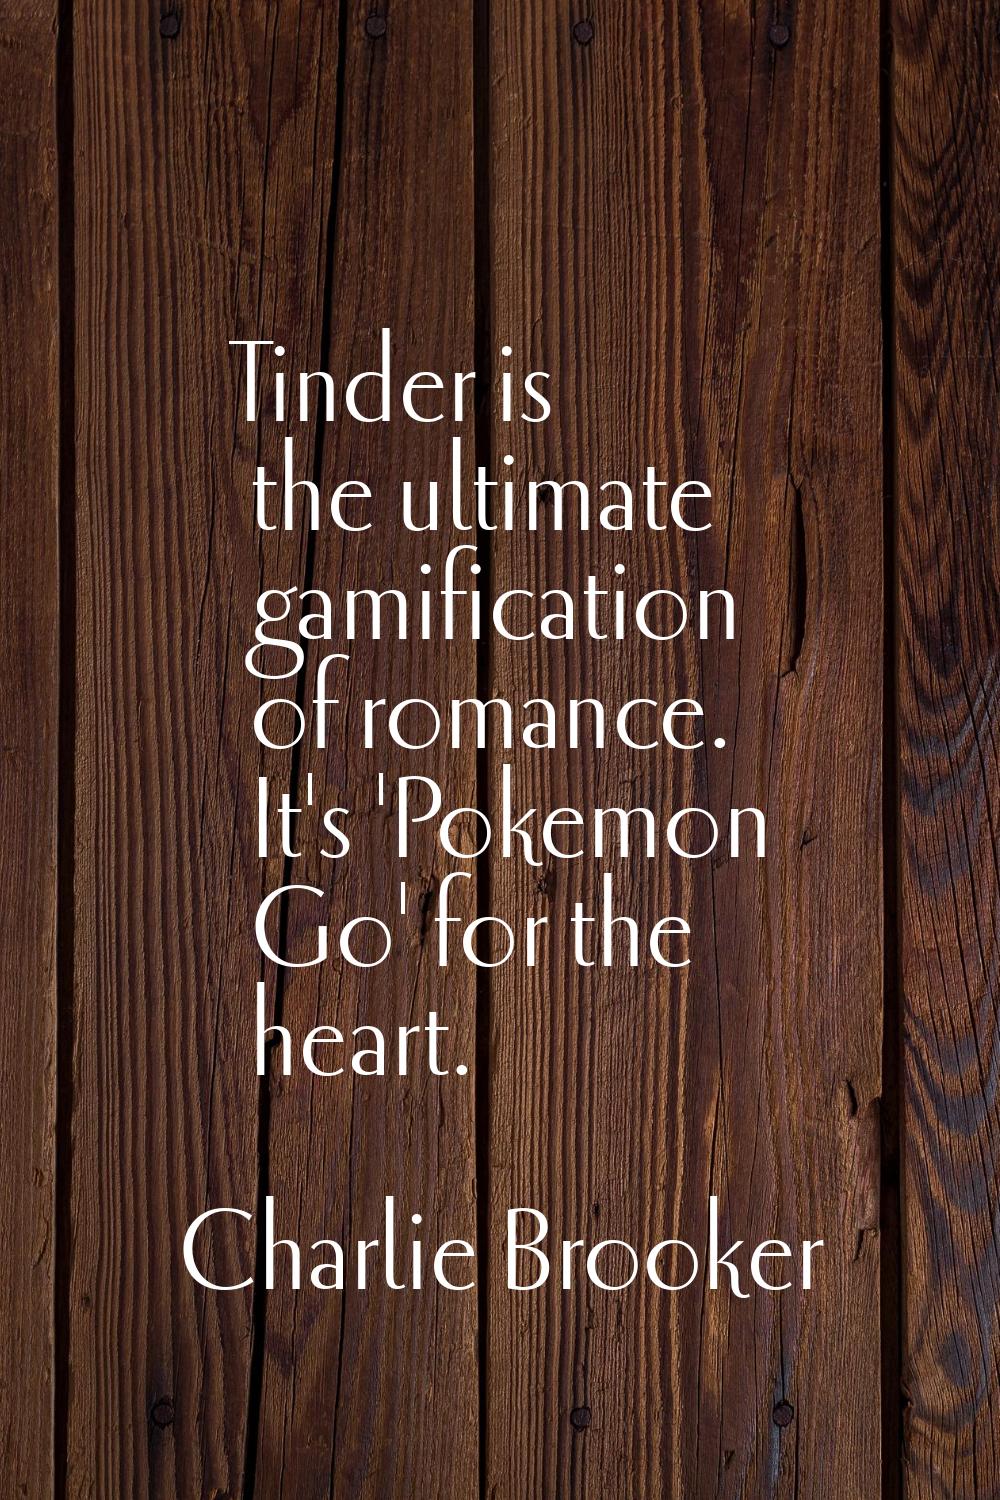 Tinder is the ultimate gamification of romance. It's 'Pokemon Go' for the heart.